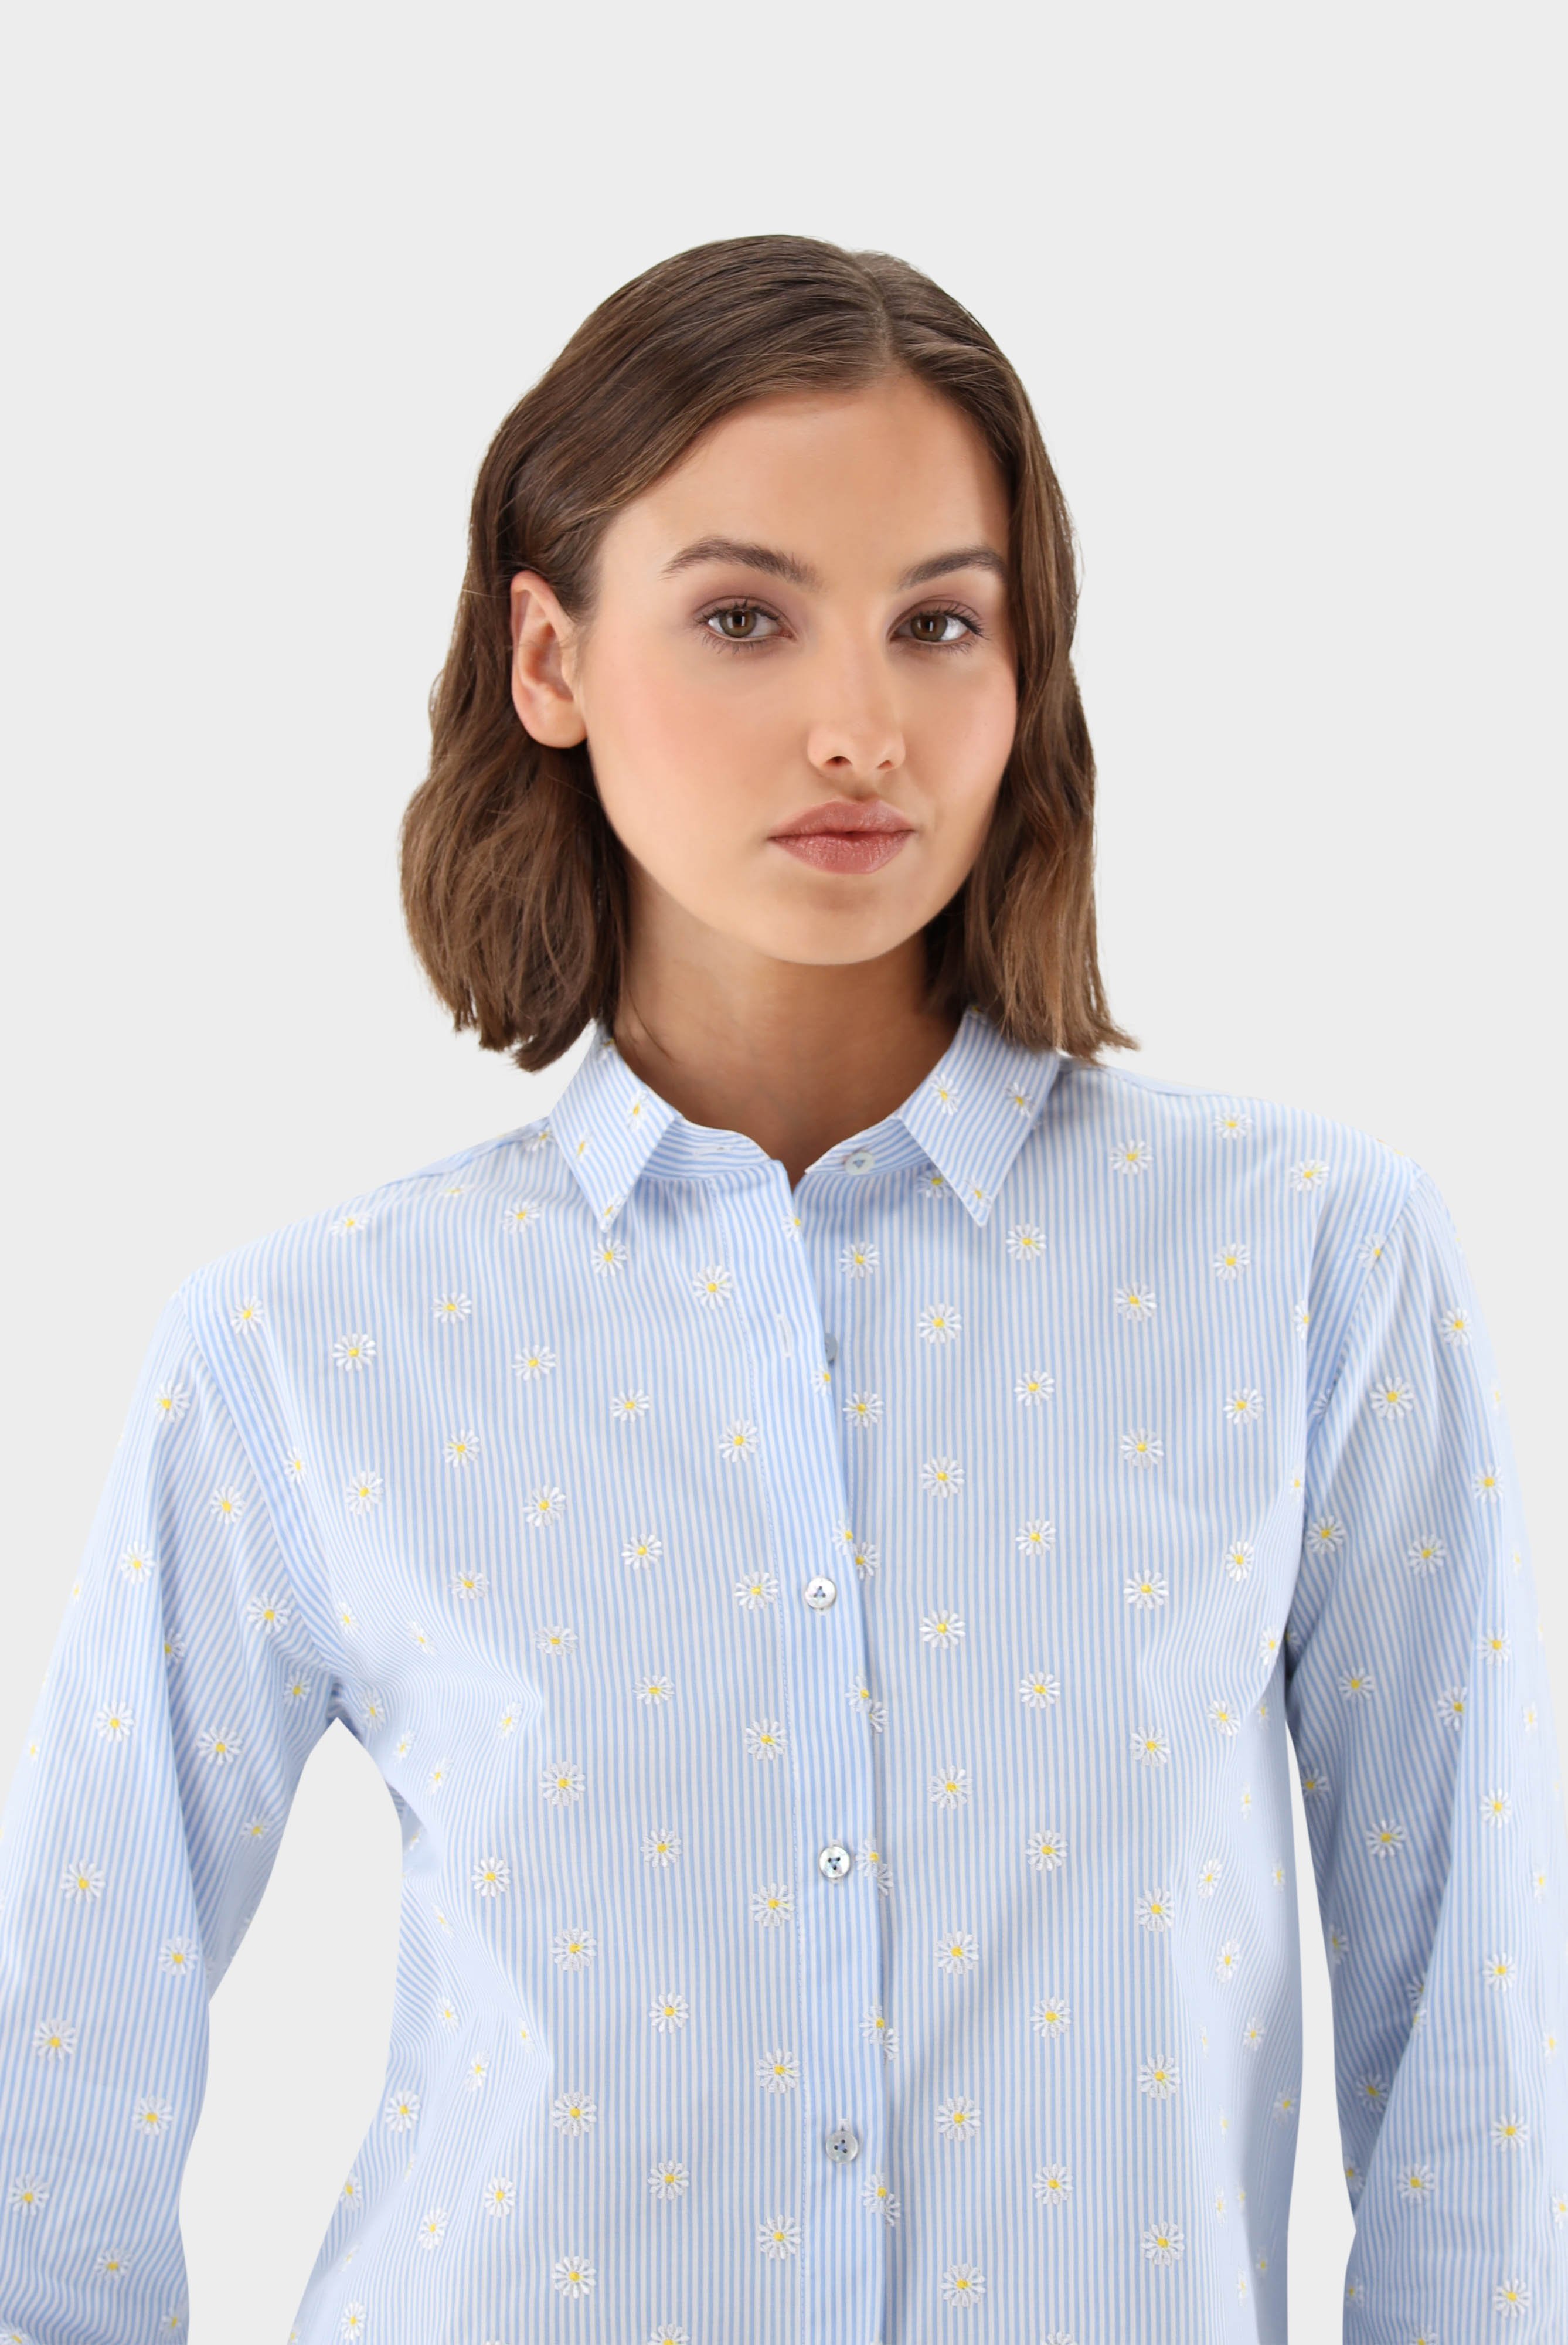 Casual Blouses+Striped shirt blouse with floral embroidery+05.528R.FU.151316.730.40